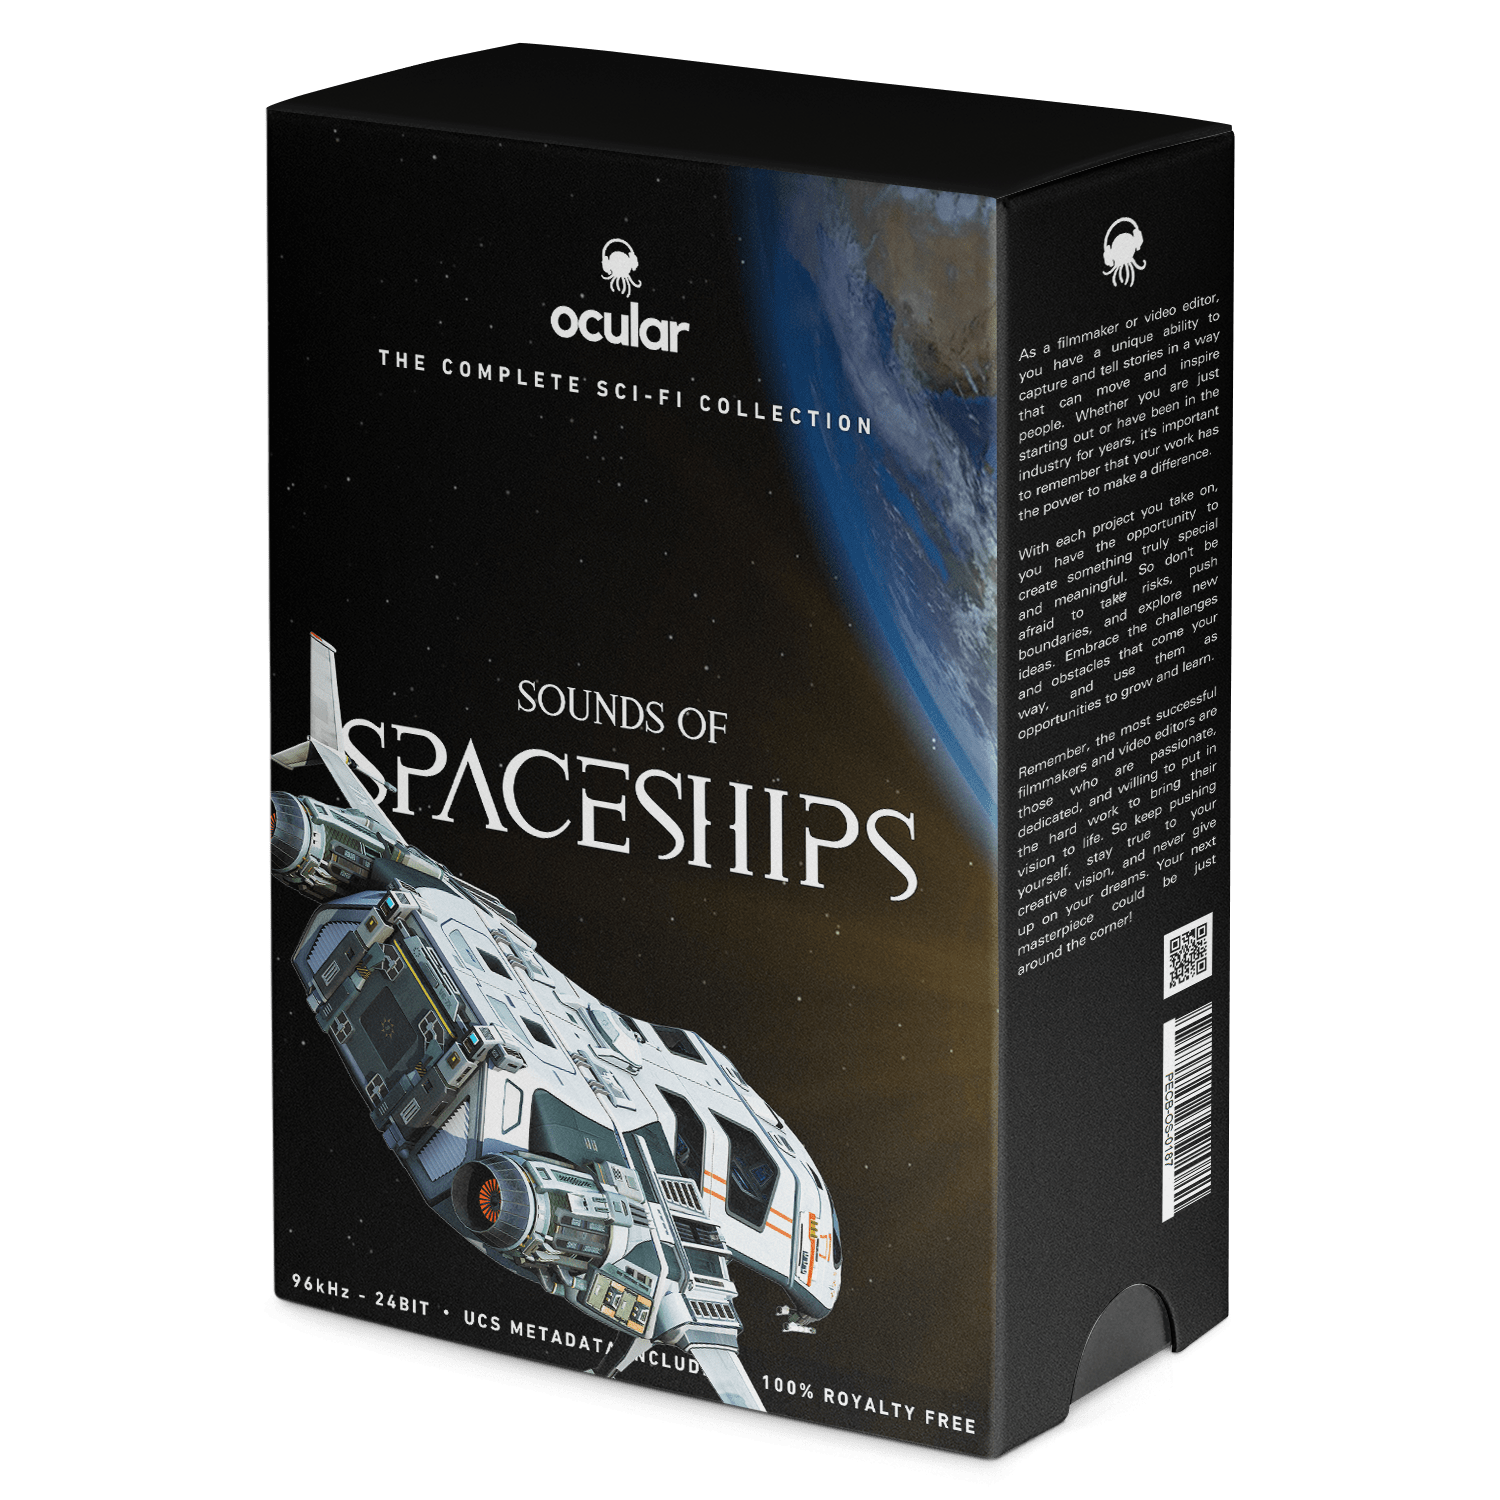 Sounds of Spaceships Sound Effects for Video Editing. Professional Sound FX Library.